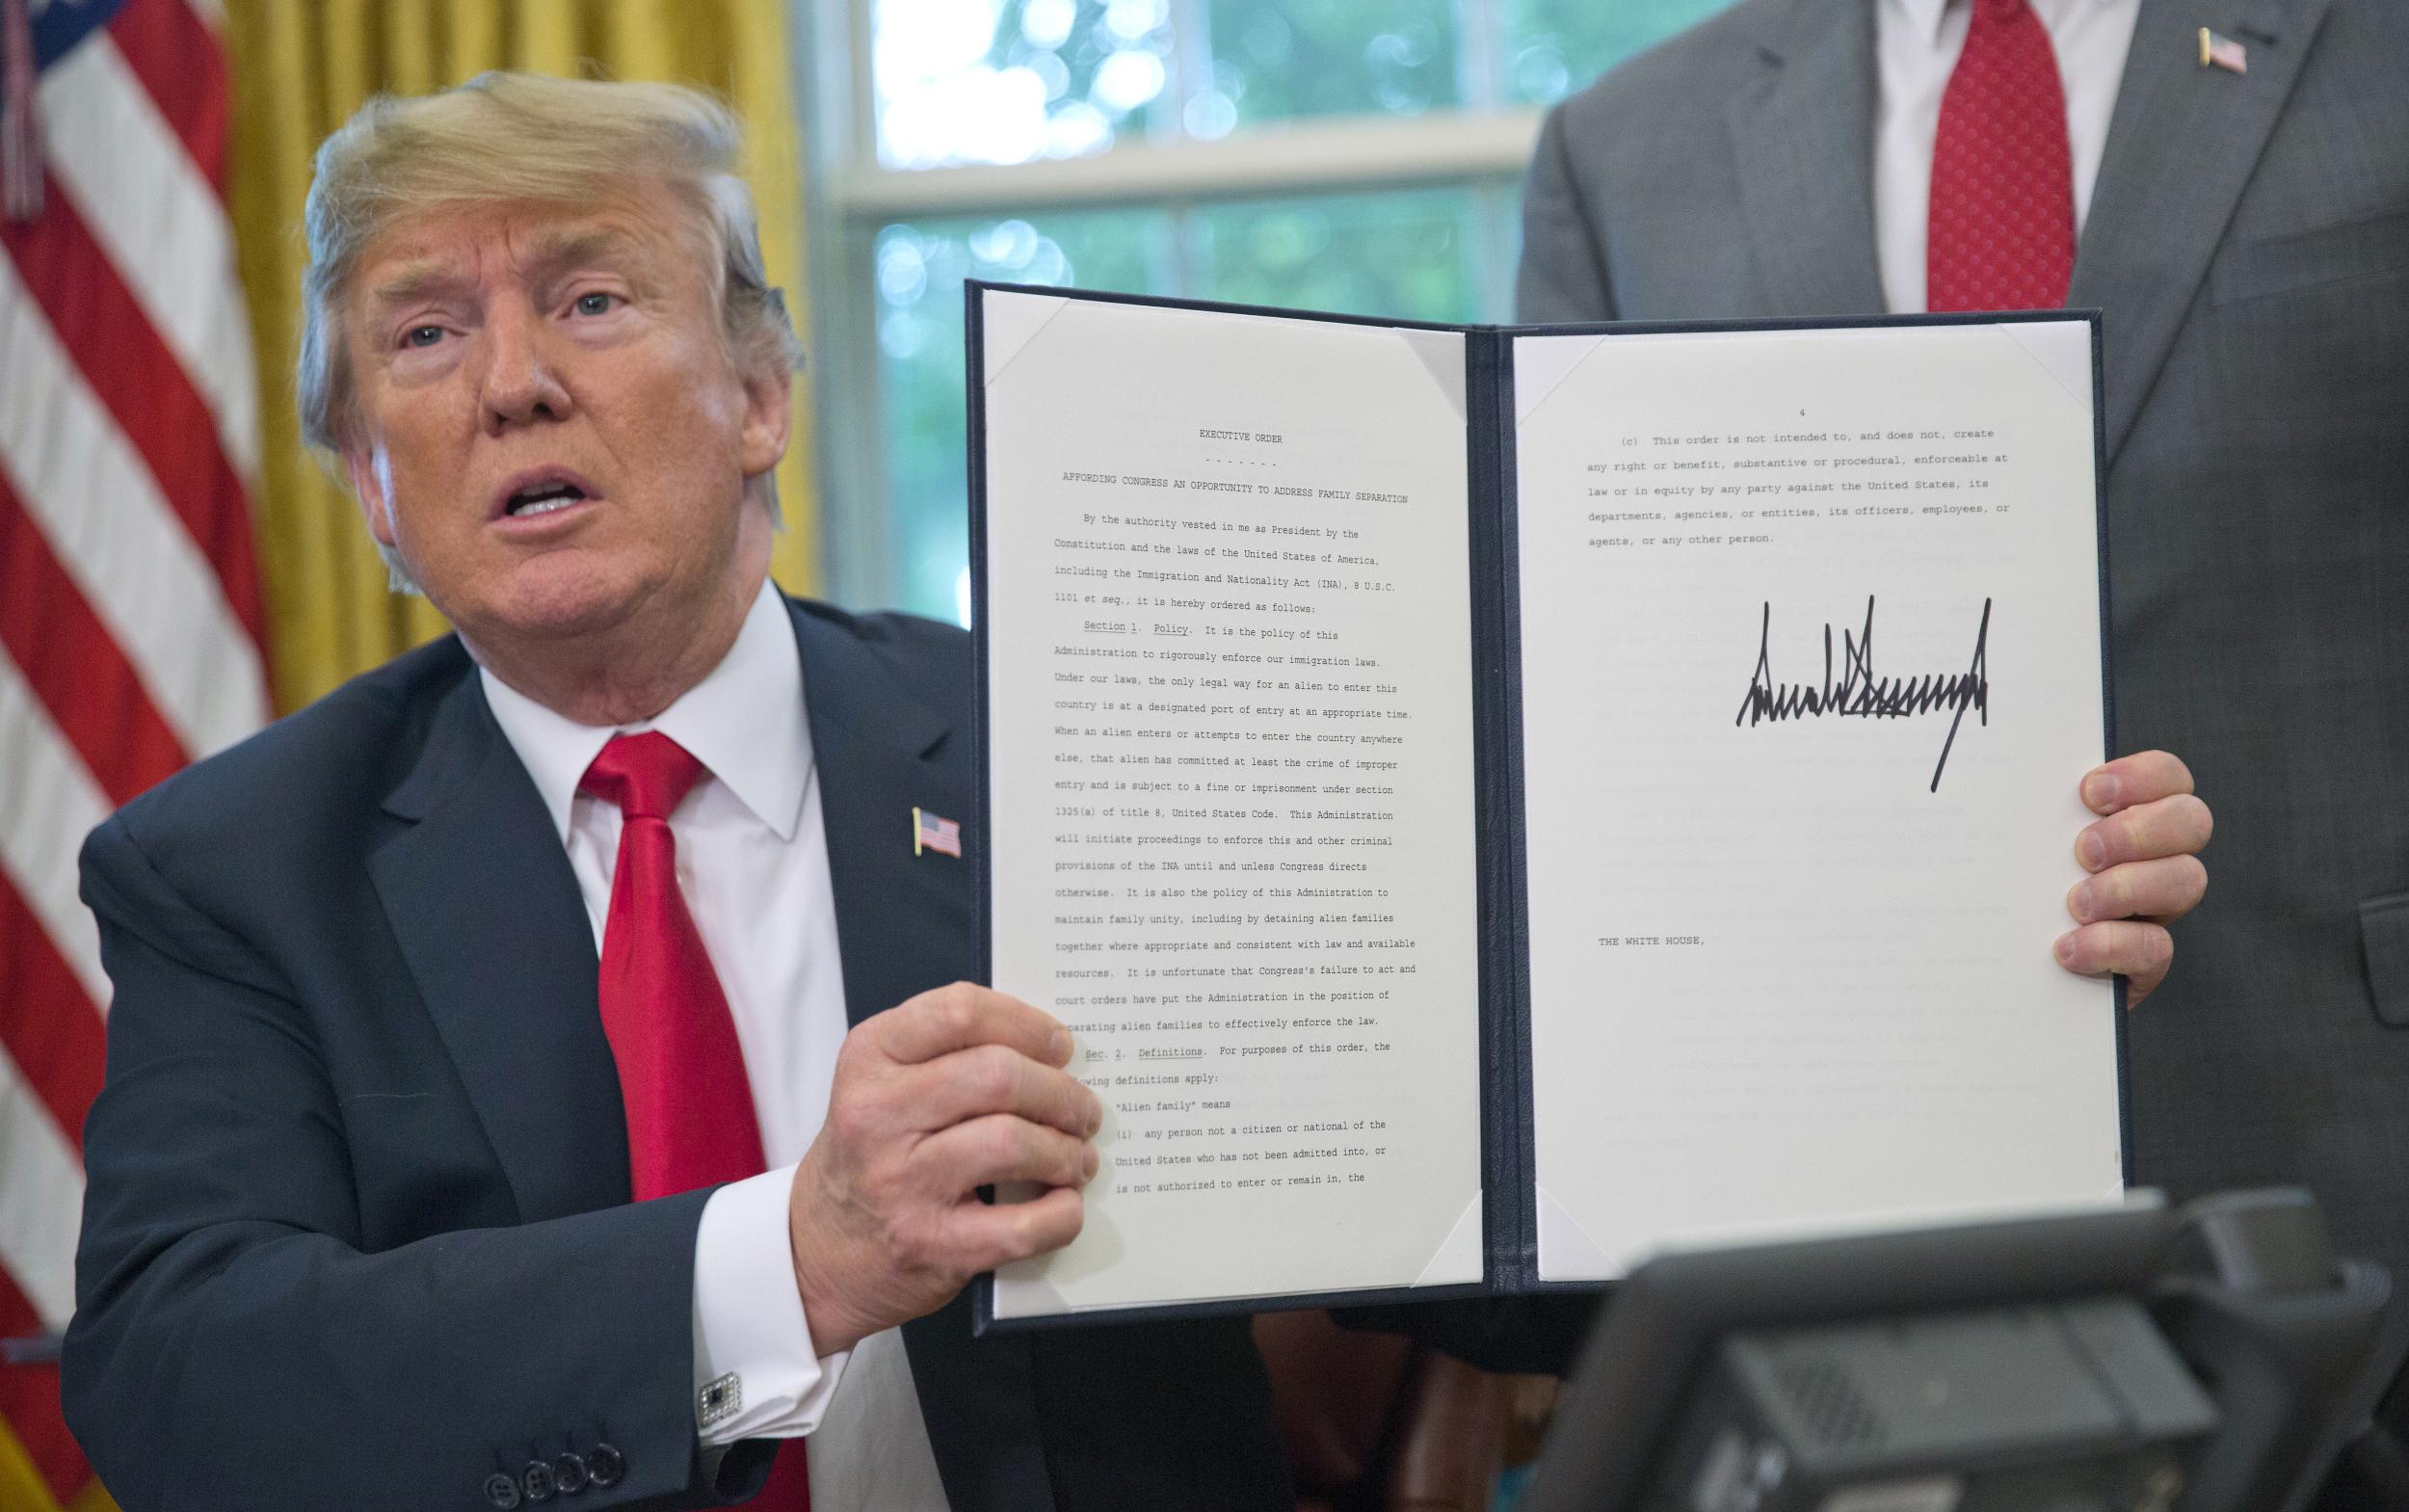 President Donald Trump holds up the executive order he signed to end family separations, during an event in the Oval Office